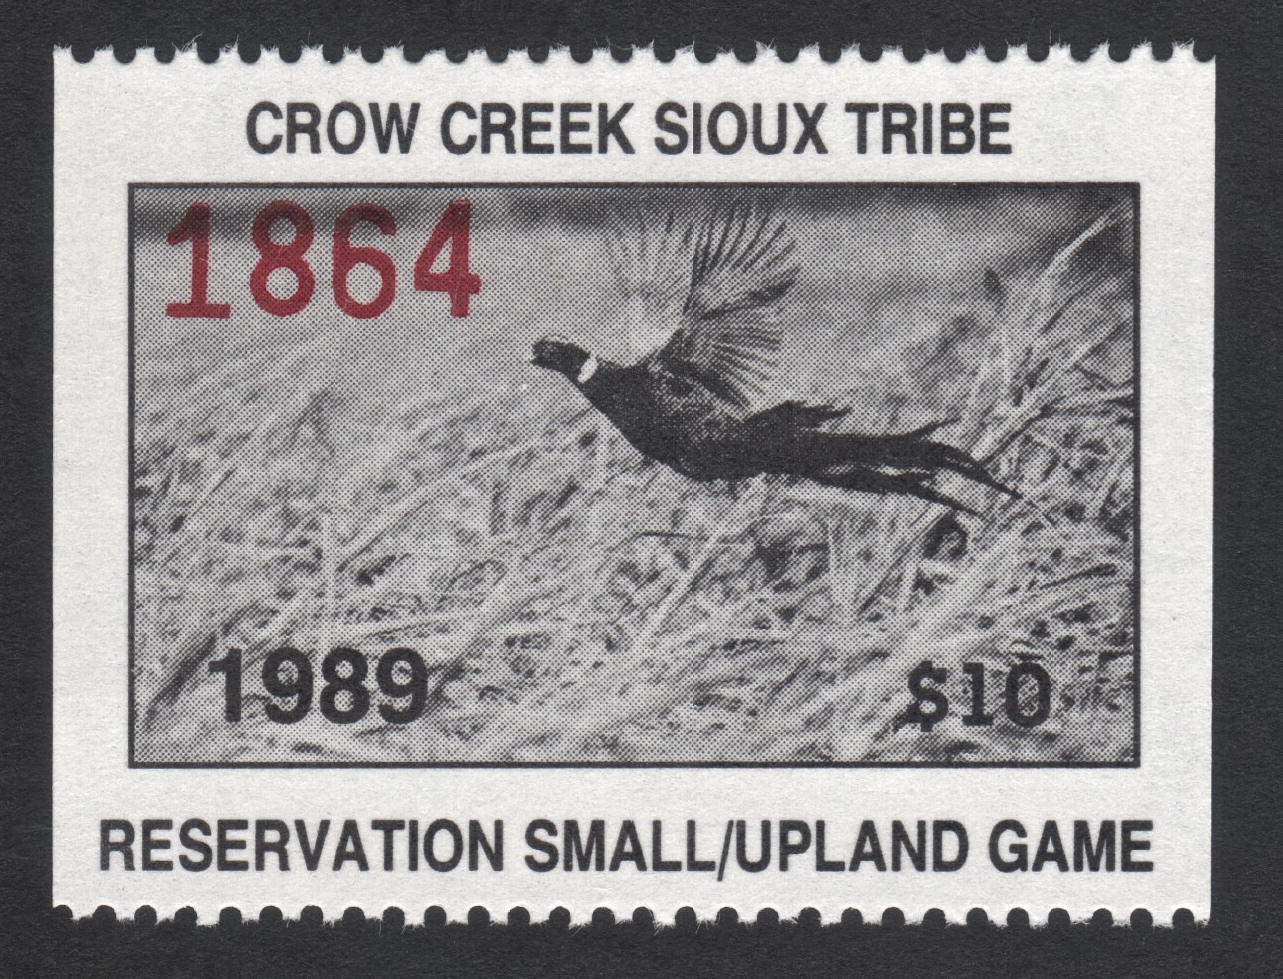 1989 Crow Creek Reservation Small/Upland Game